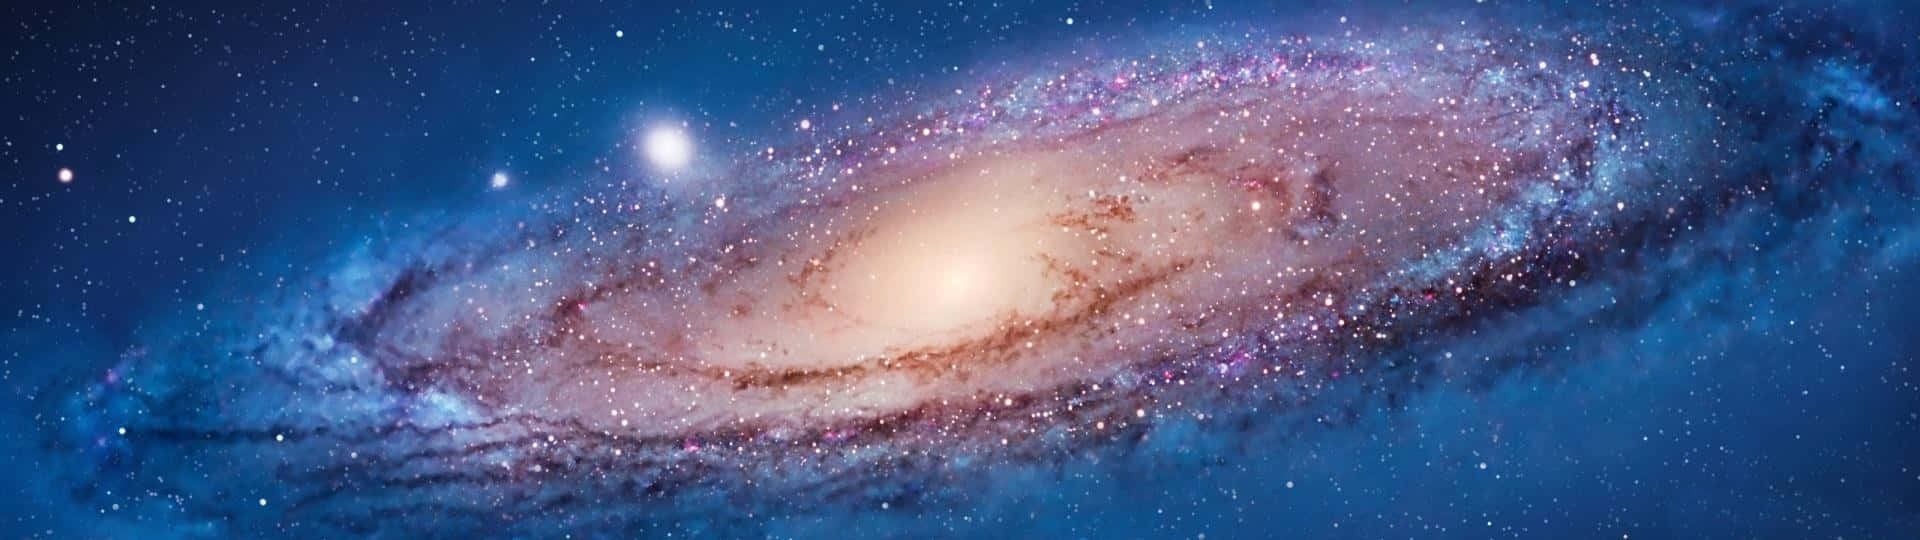 The Galaxy Is Shown In A Blue And Blue Color Wallpaper